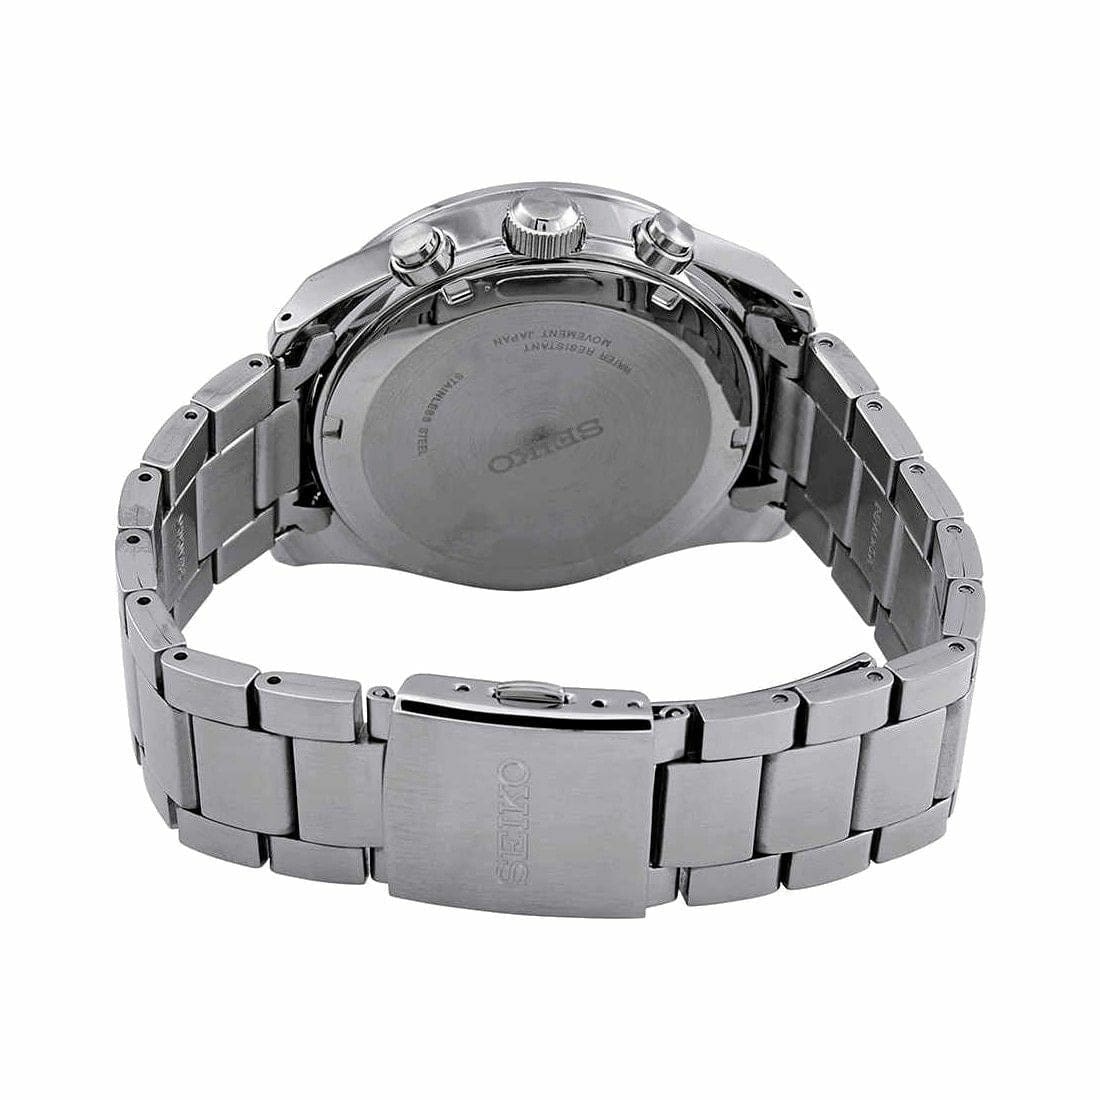 Seiko SSC715 Solar Stainless Steel Grey Dial Men's Chronograph Tachymeter Watch 029665196484